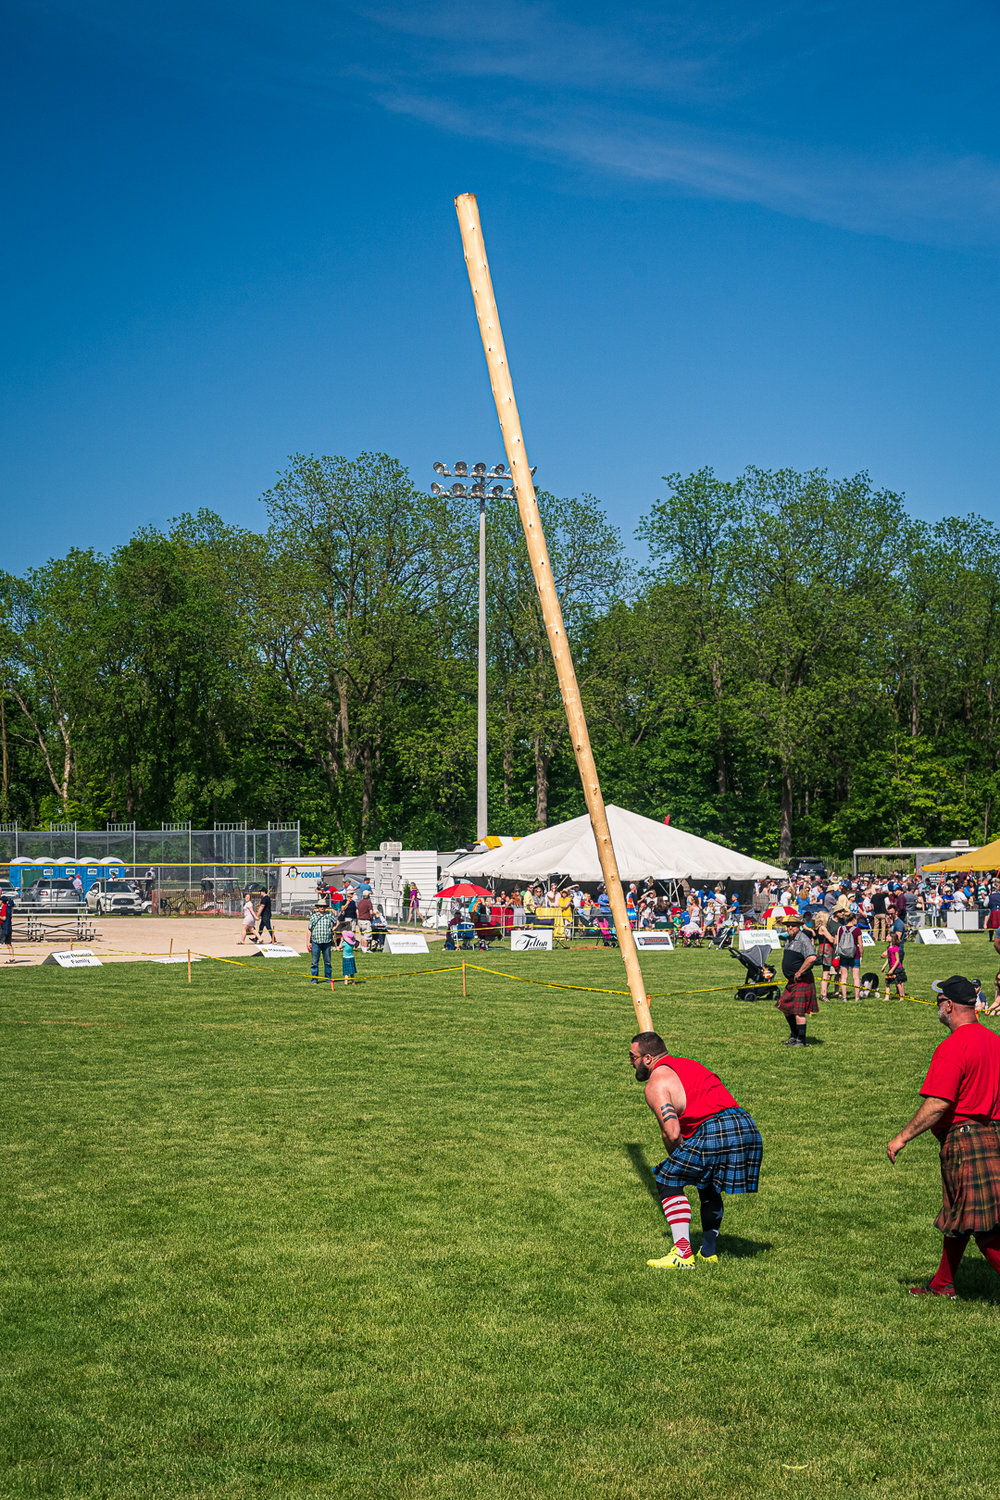 Georgetown Highland Games - Heavies Competitors